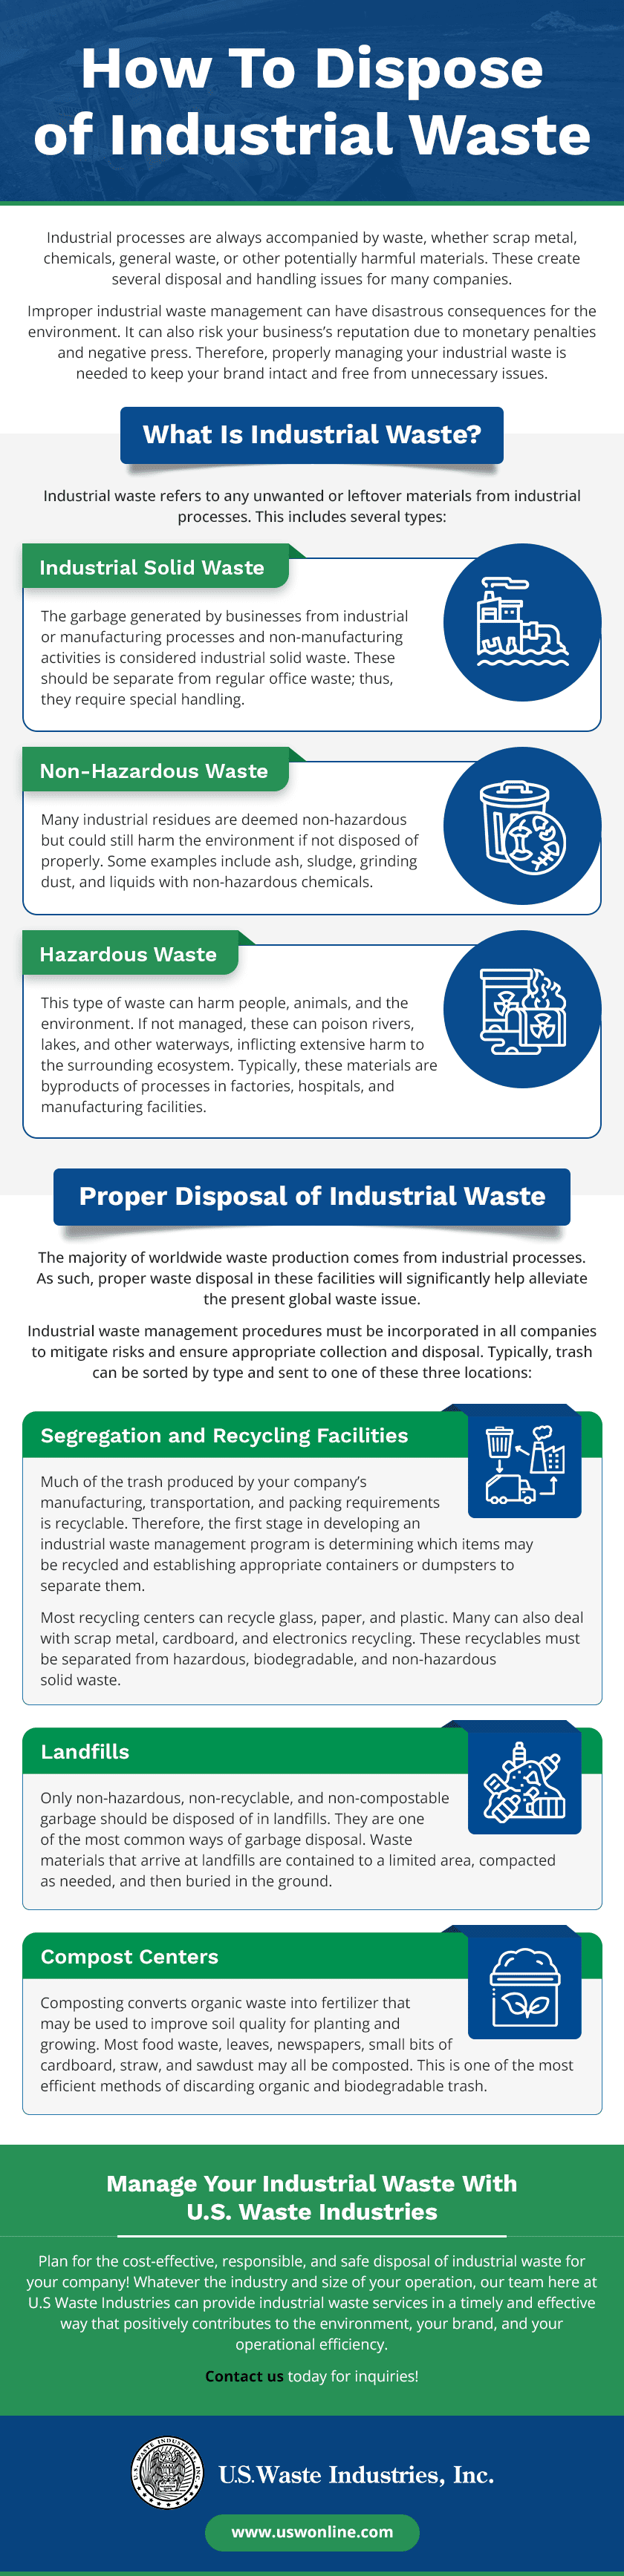 How-To-Dispose-of-Industrial-Waste